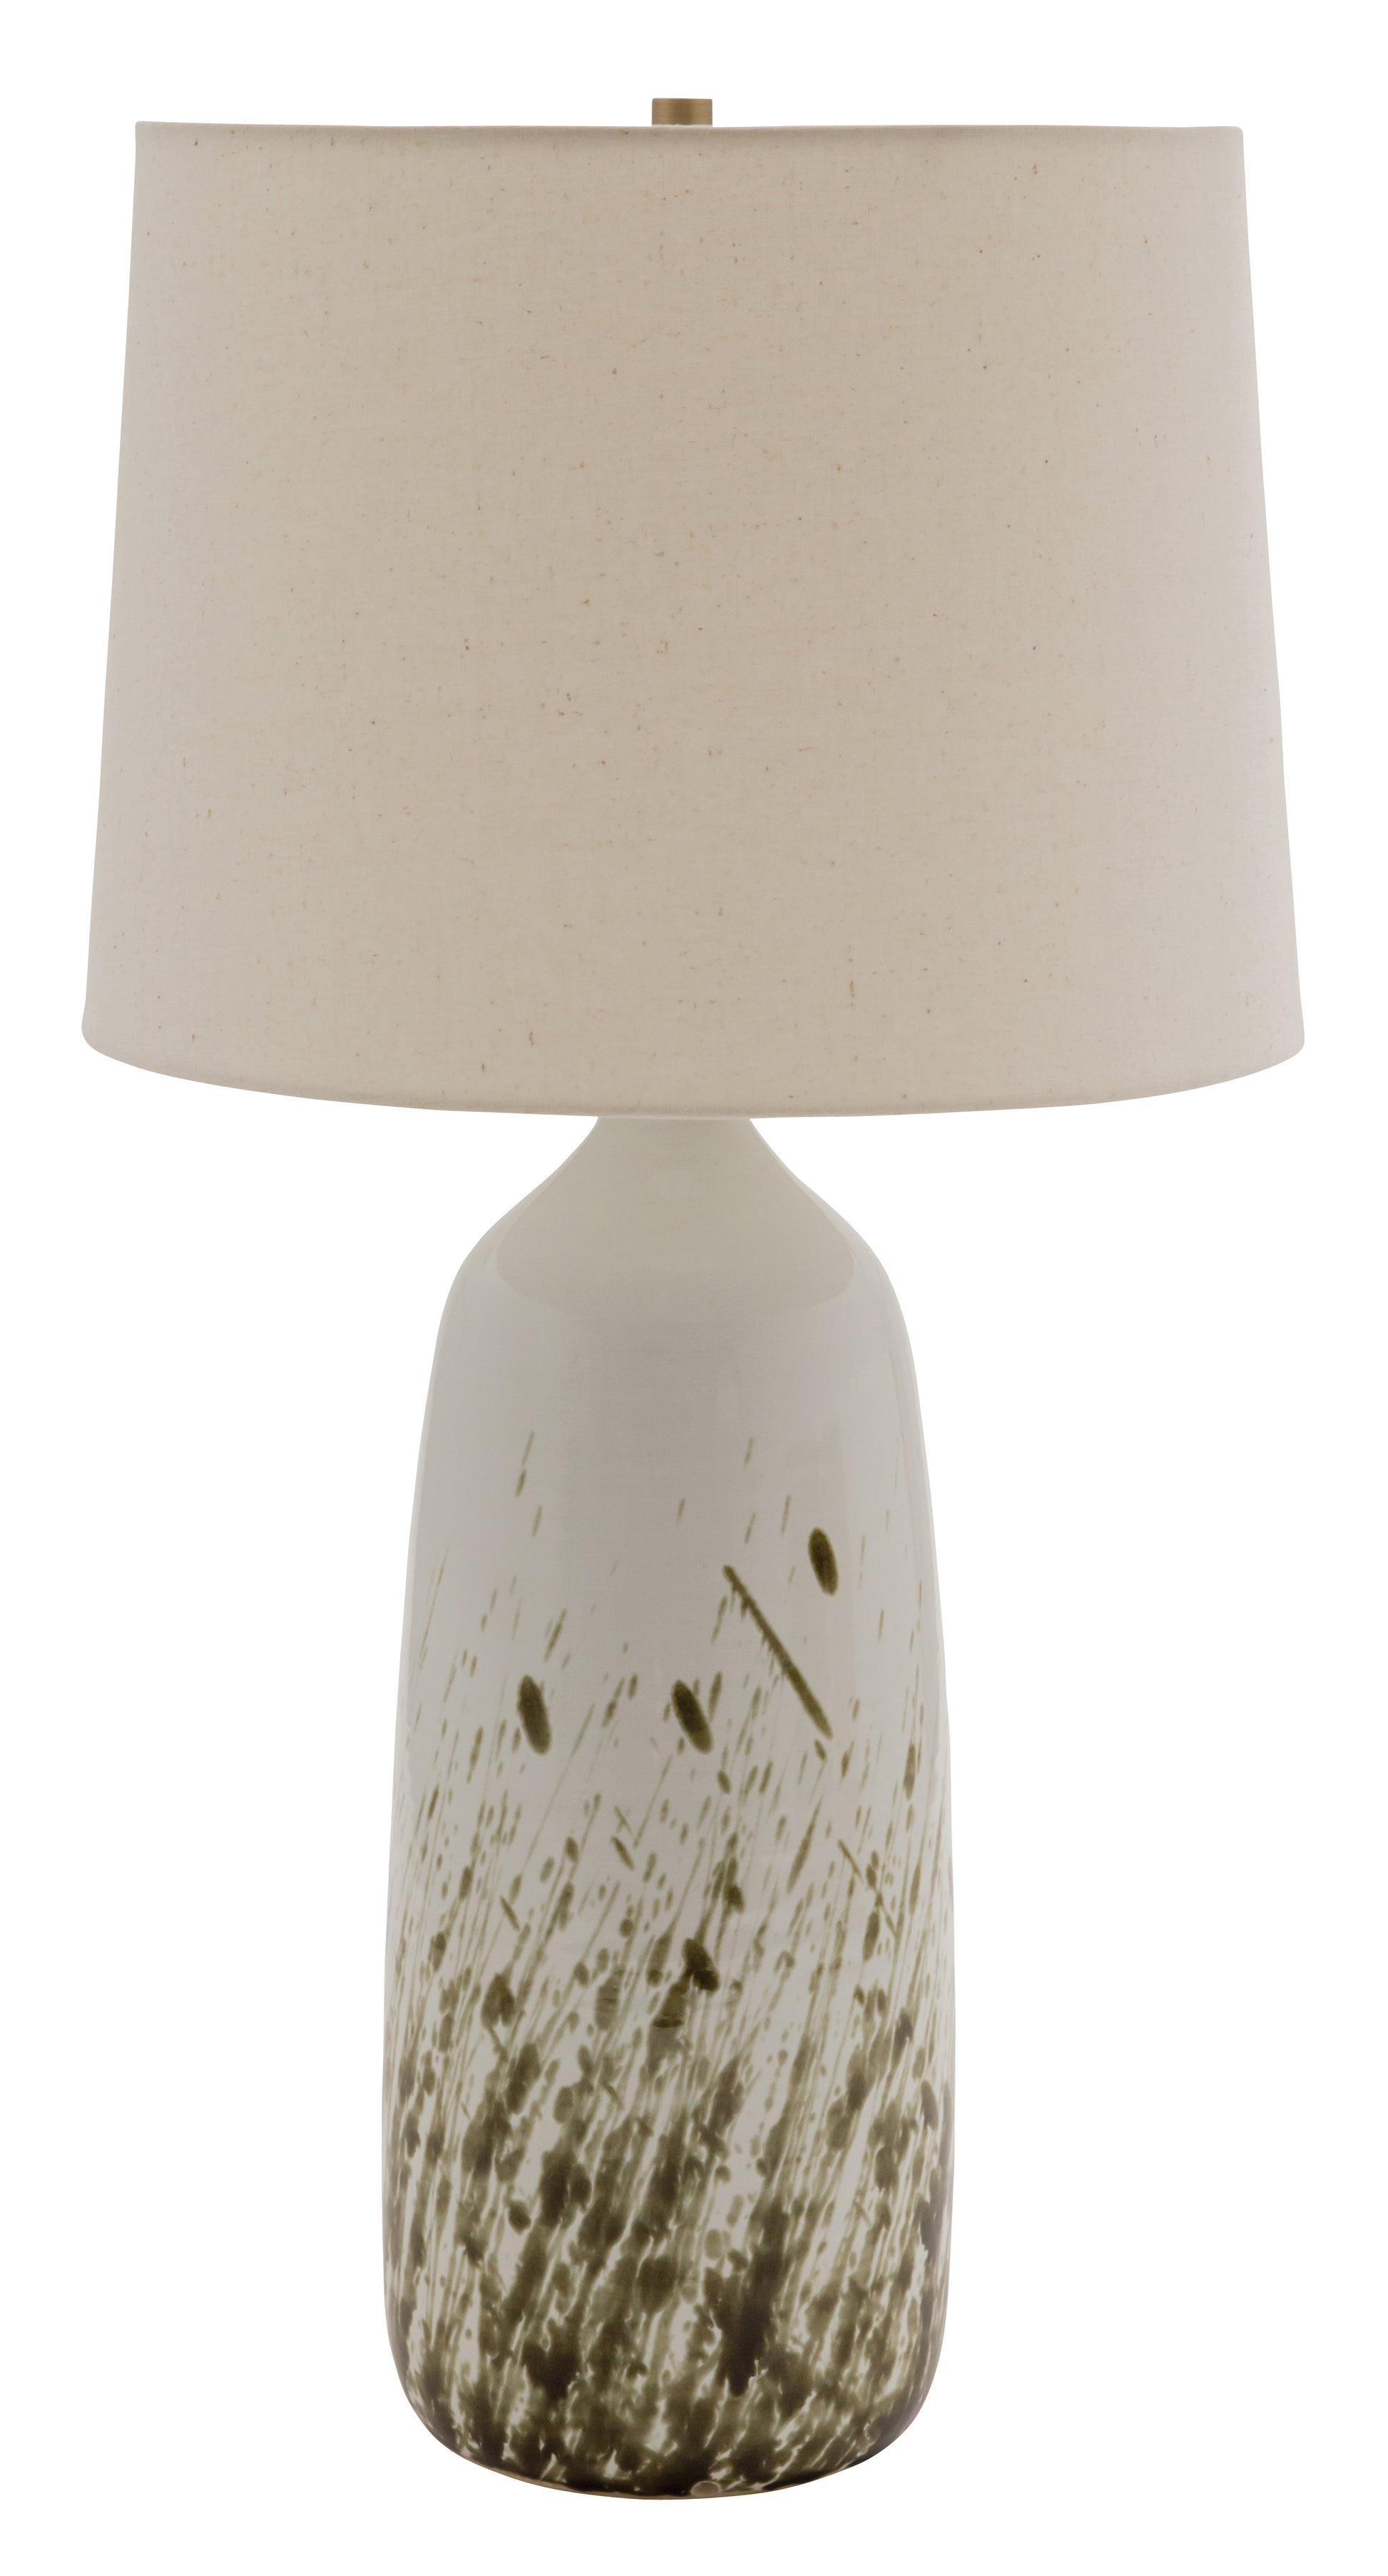 House of Troy Scatchard 31" Stoneware Table Lamp in Decorated White Gloss GS101-DWG